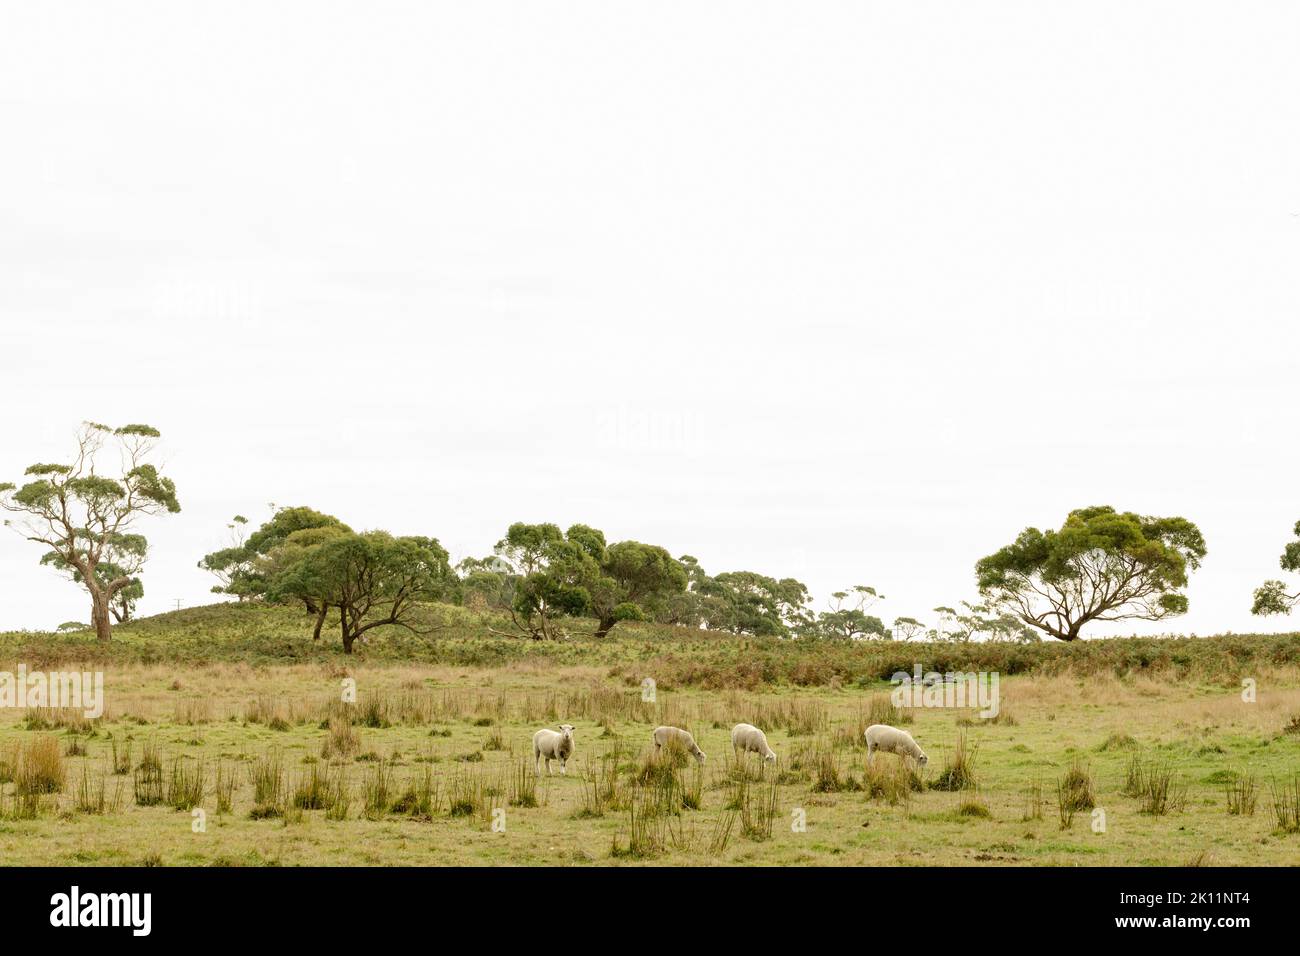 Sheep grazing in an Australian paddock on a farm in the outback with eucalyptus gum trees in the background Stock Photo